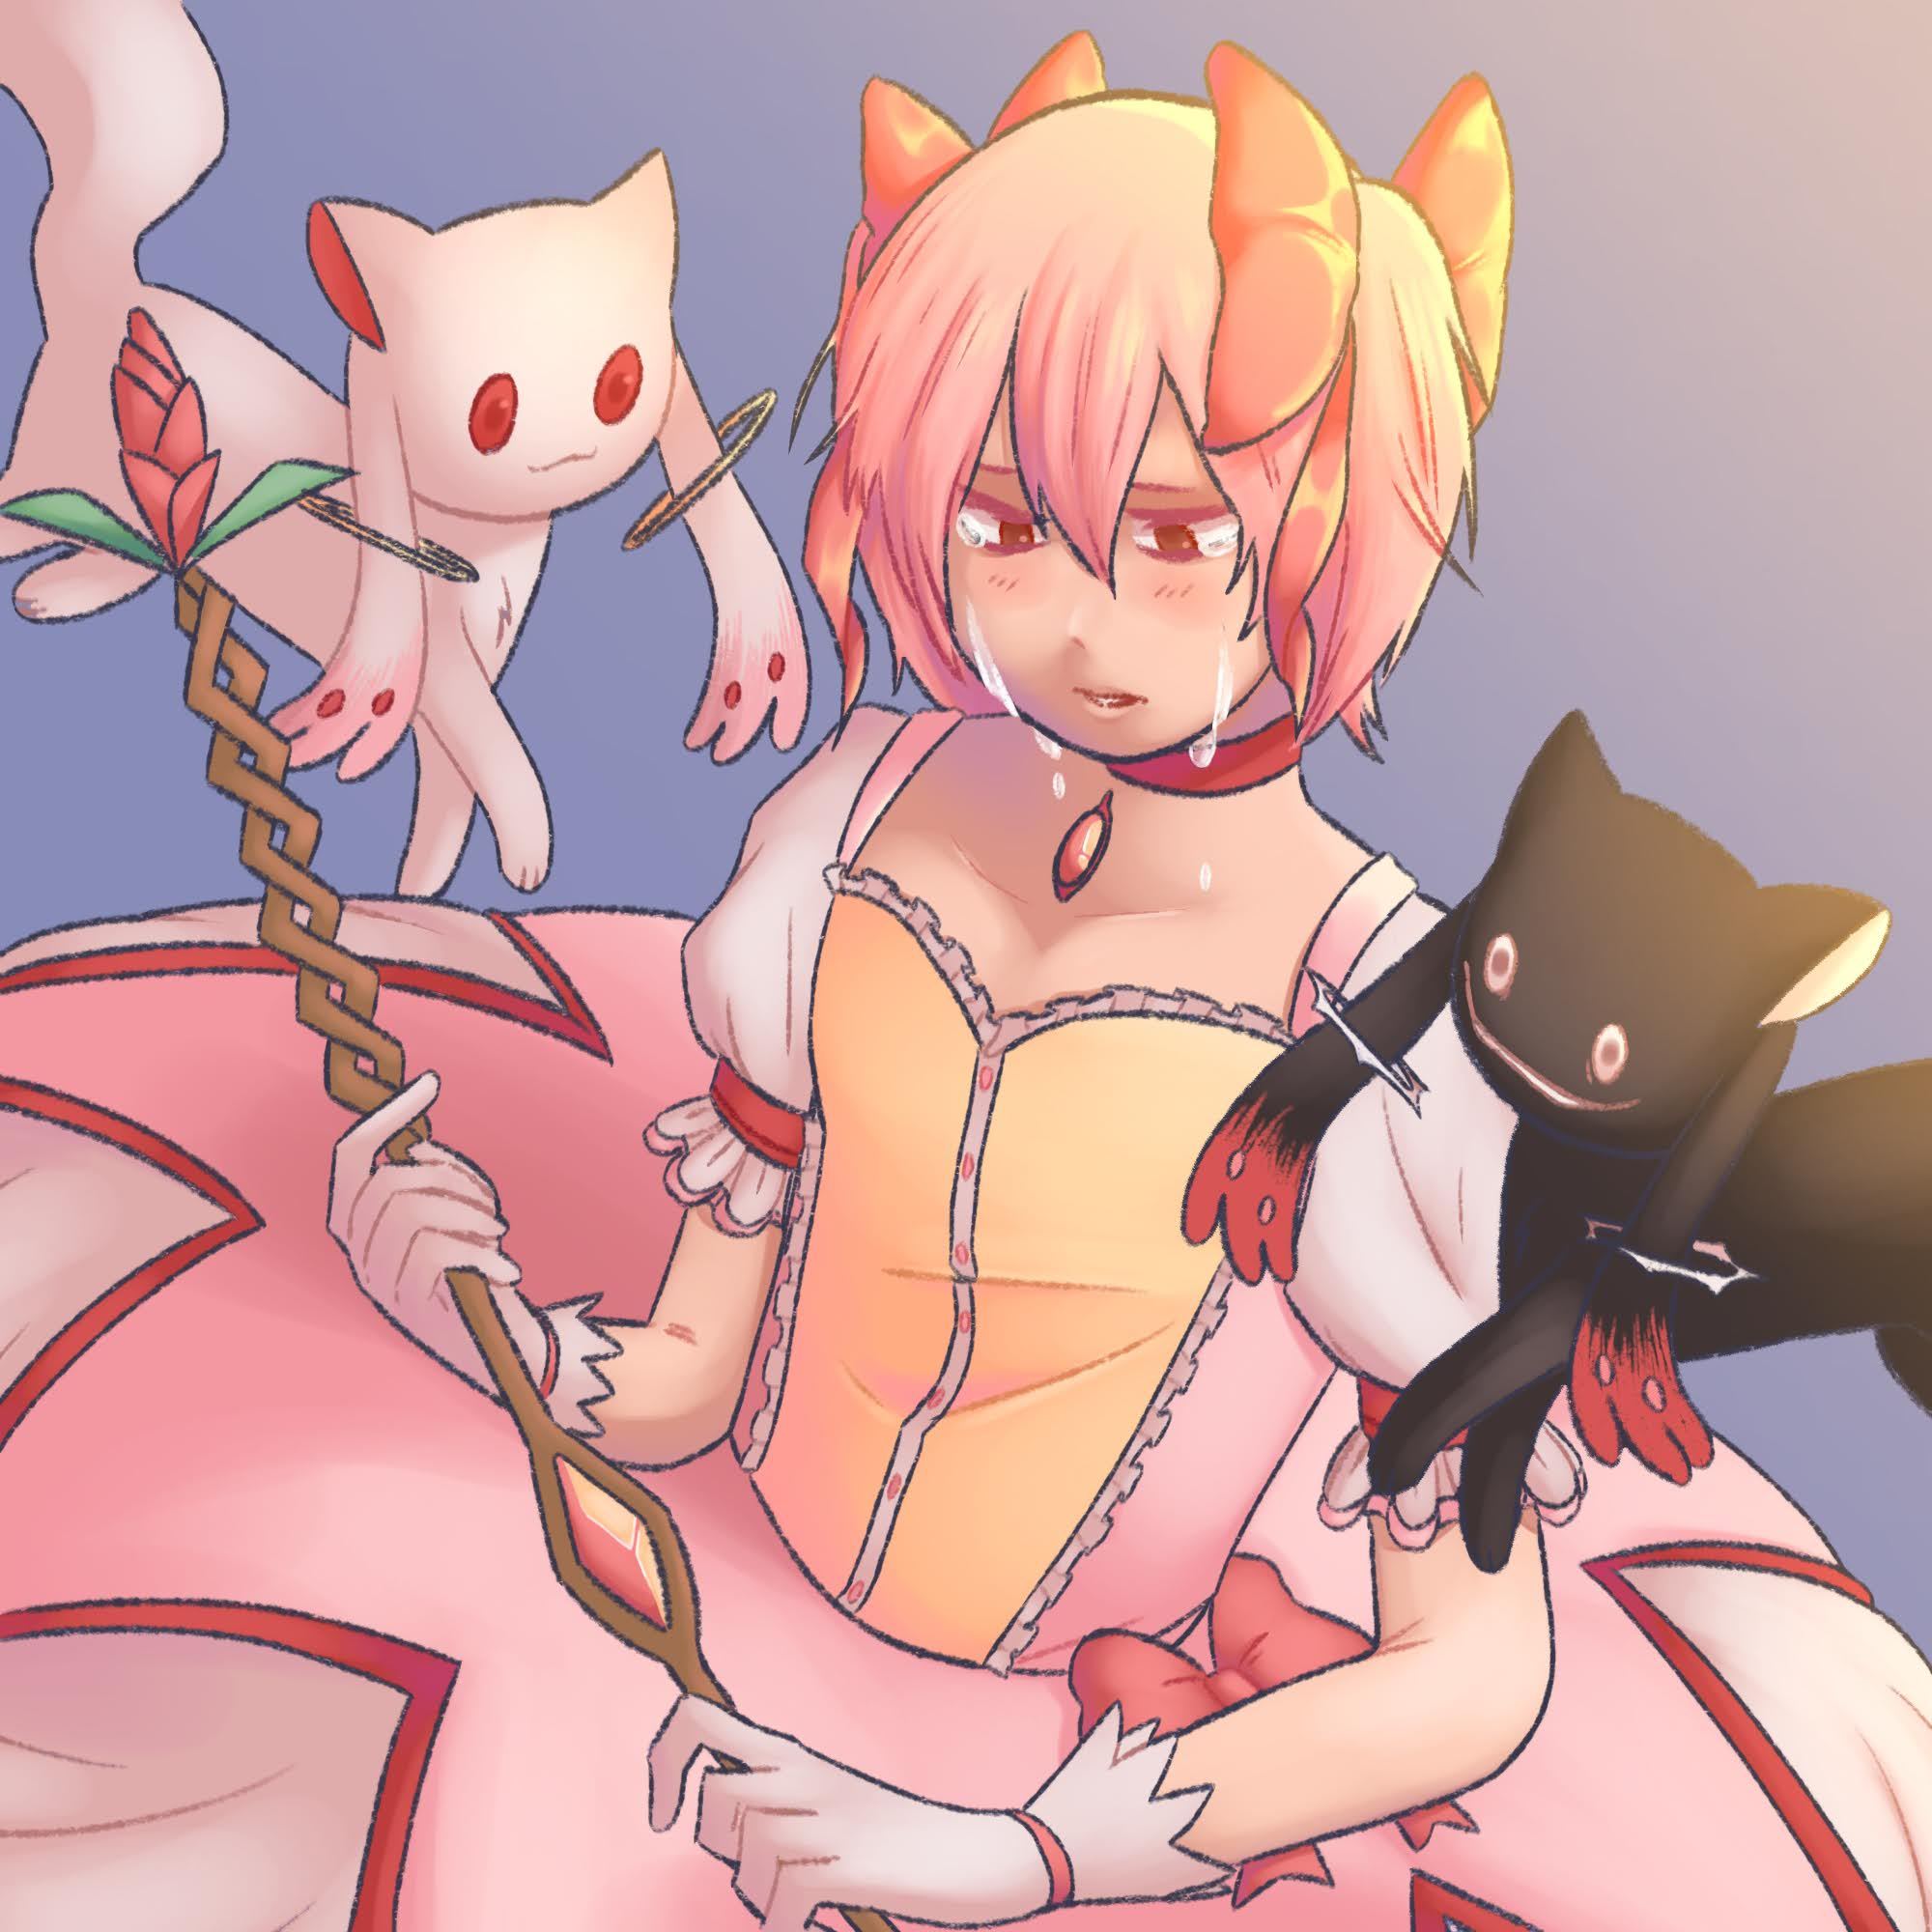 digital drawing of madoka kaname. she is in her magical girl dress, and is holding her staff and crying. above her is kyubey, and another version of kyubey who is black instead of white